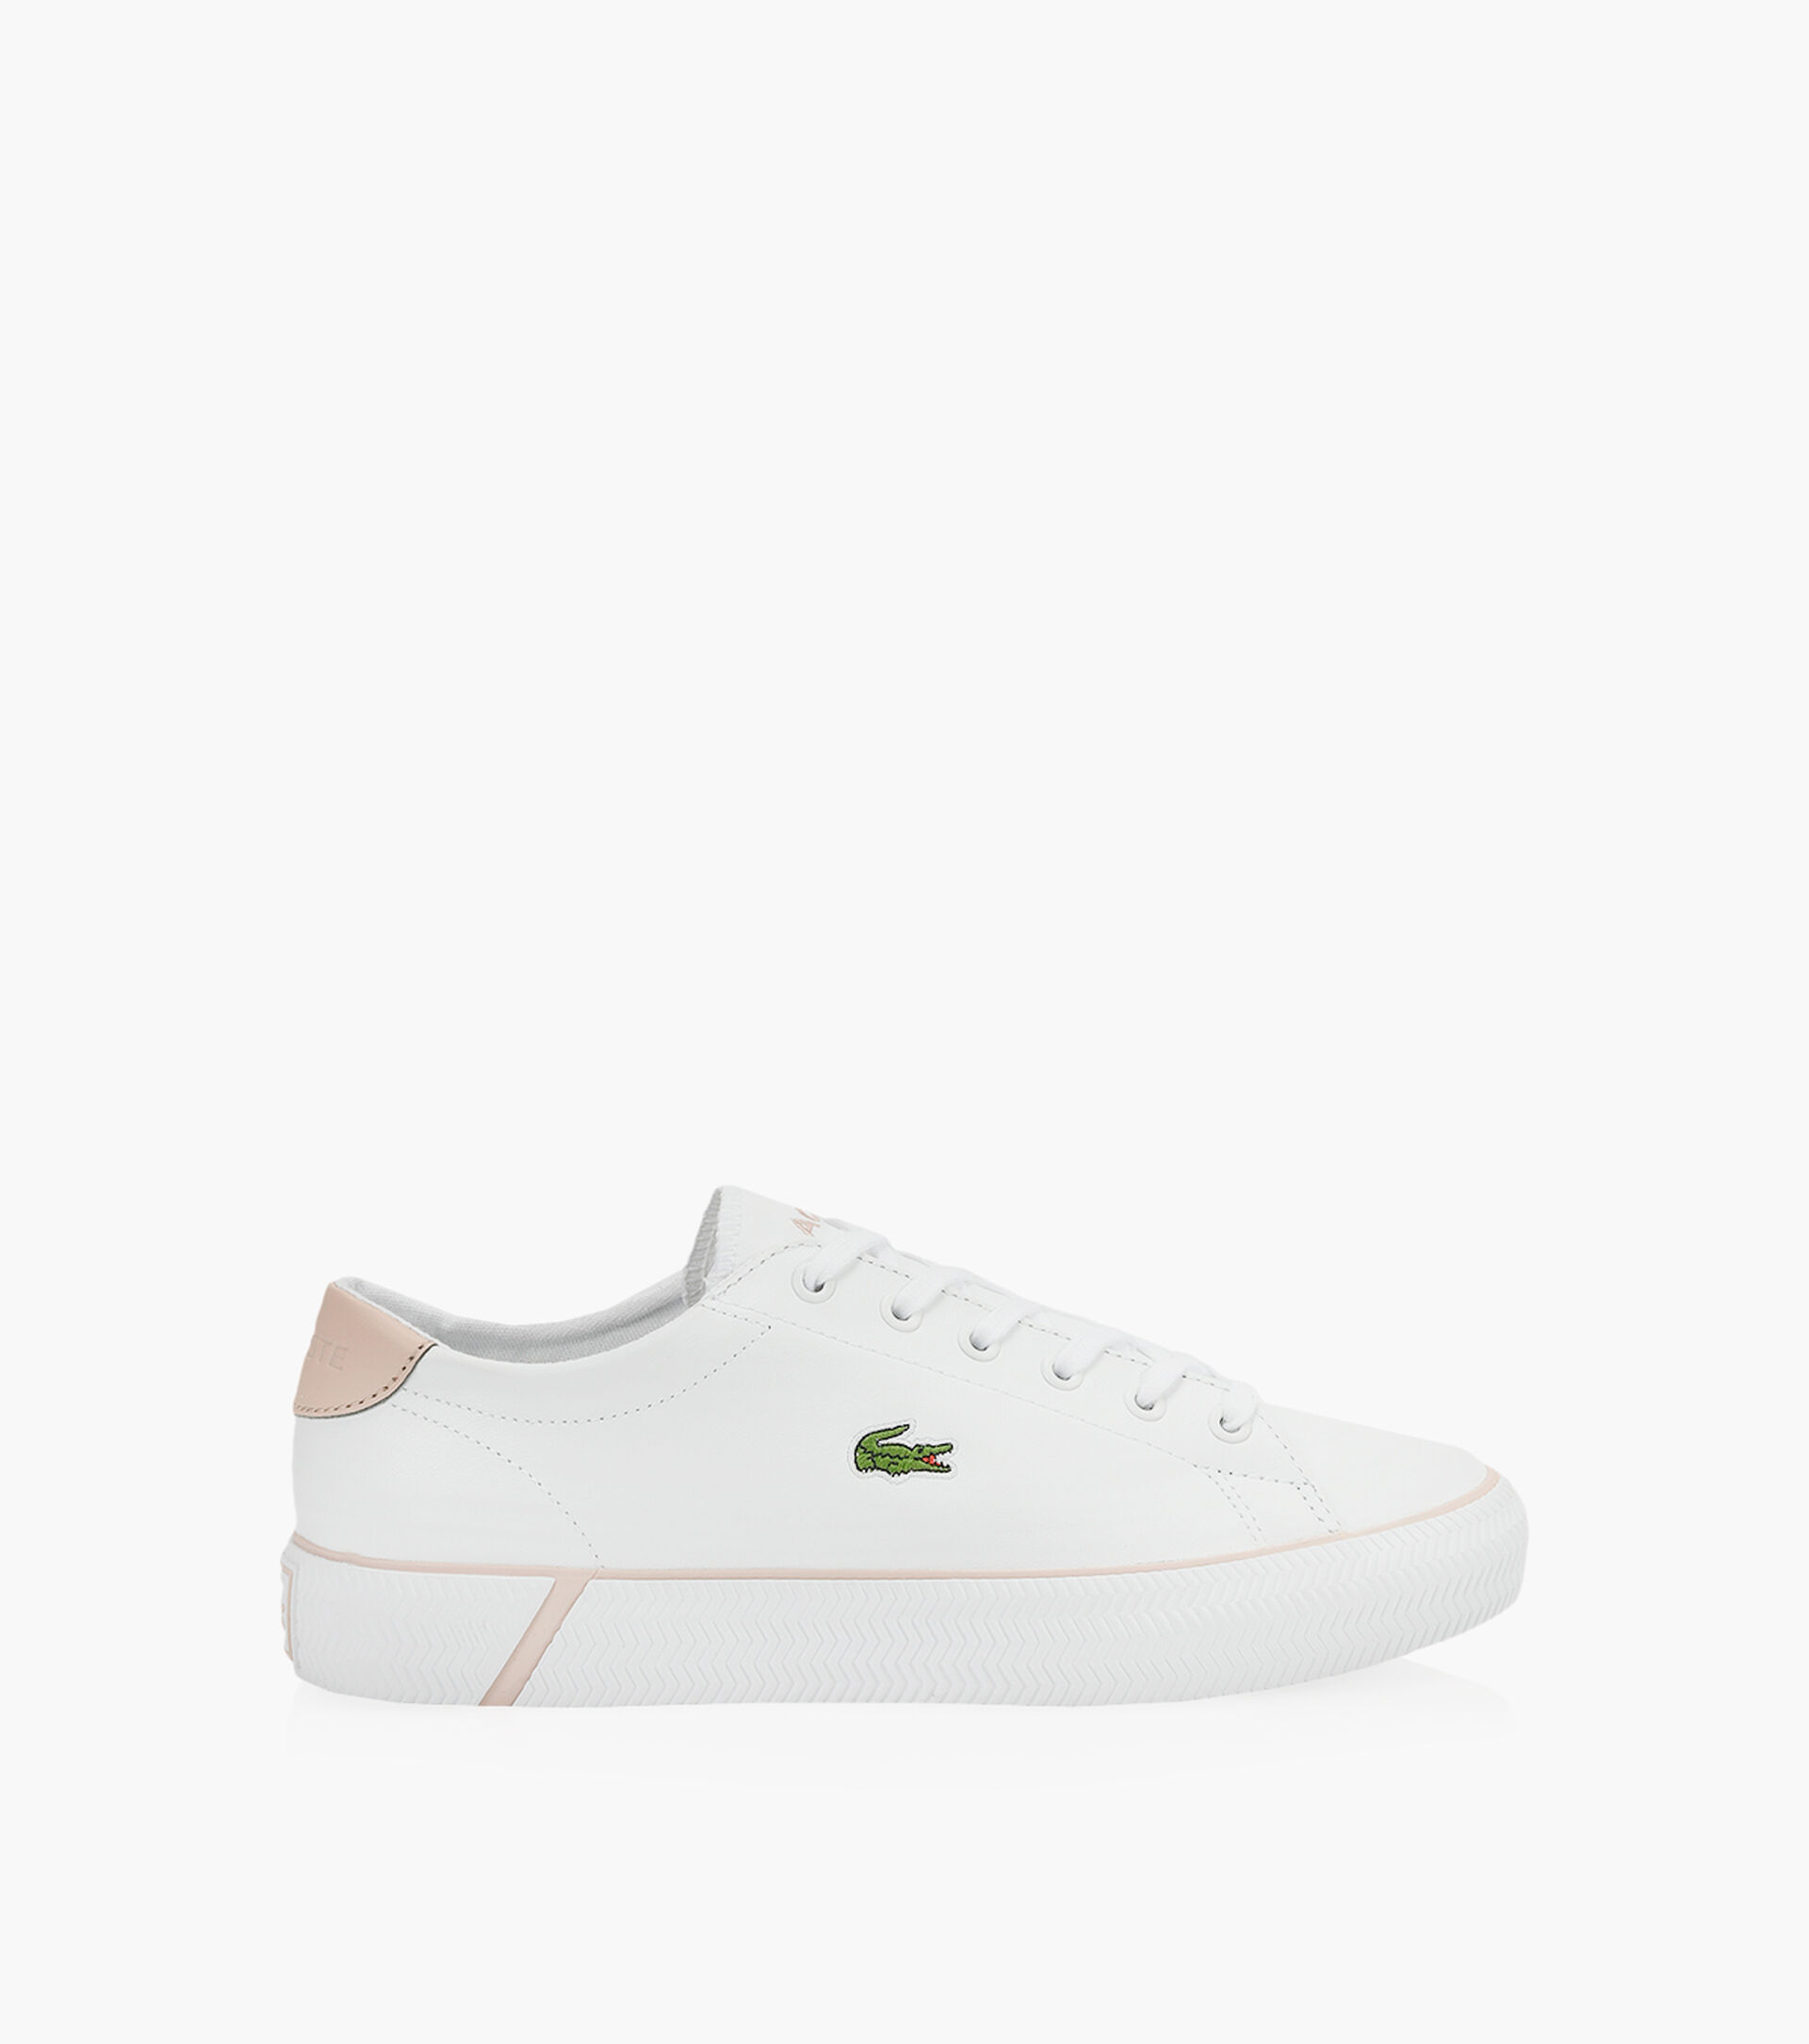 LACOSTE GRIPSHOT - White Leather | Browns Shoes